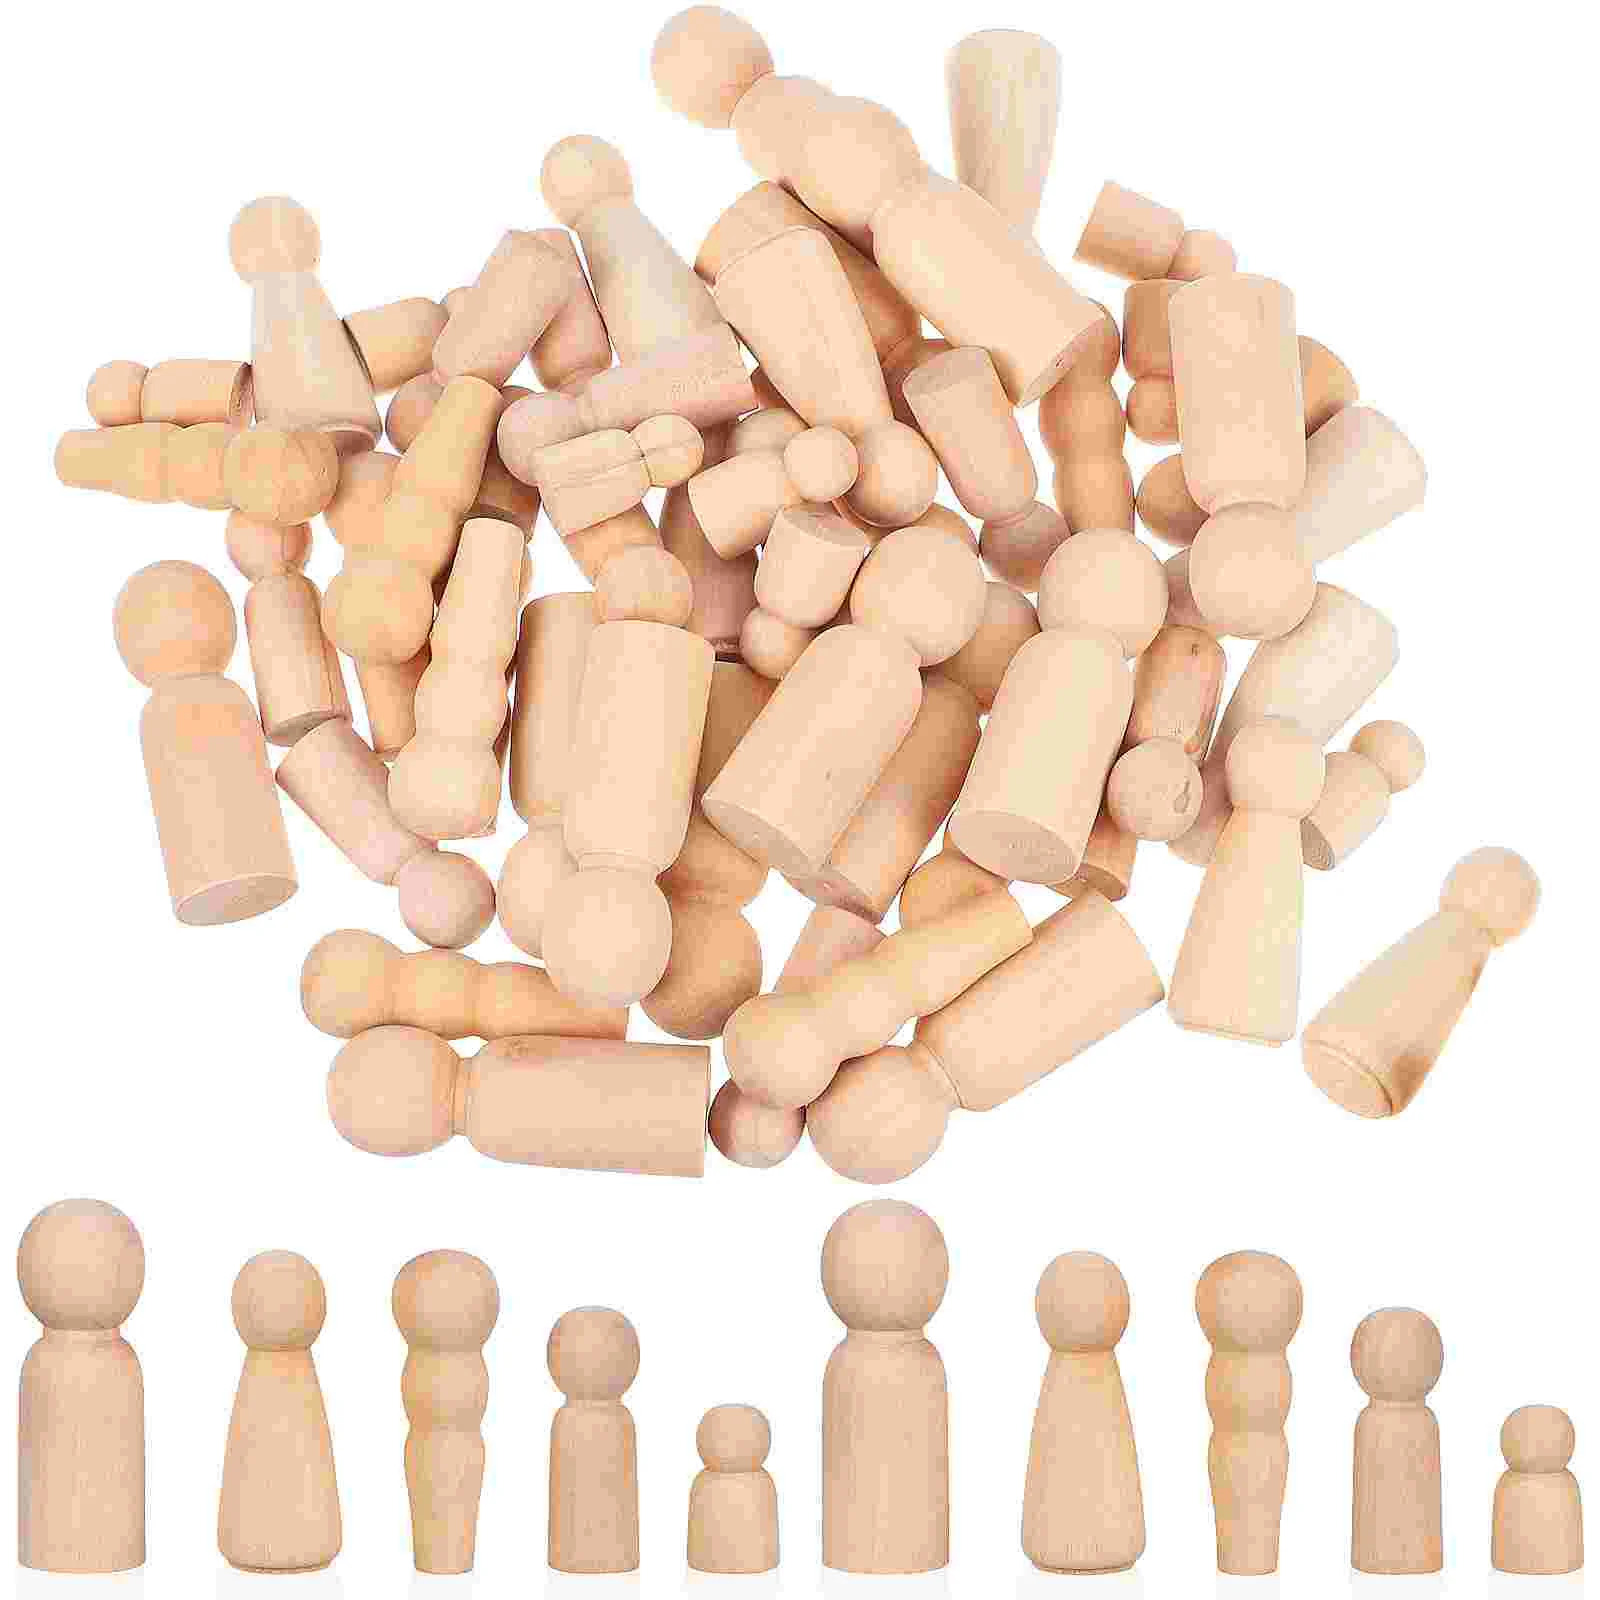 

50 Pcs Toys Wooden Peg People Unfinished Dolls Painted DIY Graffiti Lotus Tree Unpainted Painting Adornments